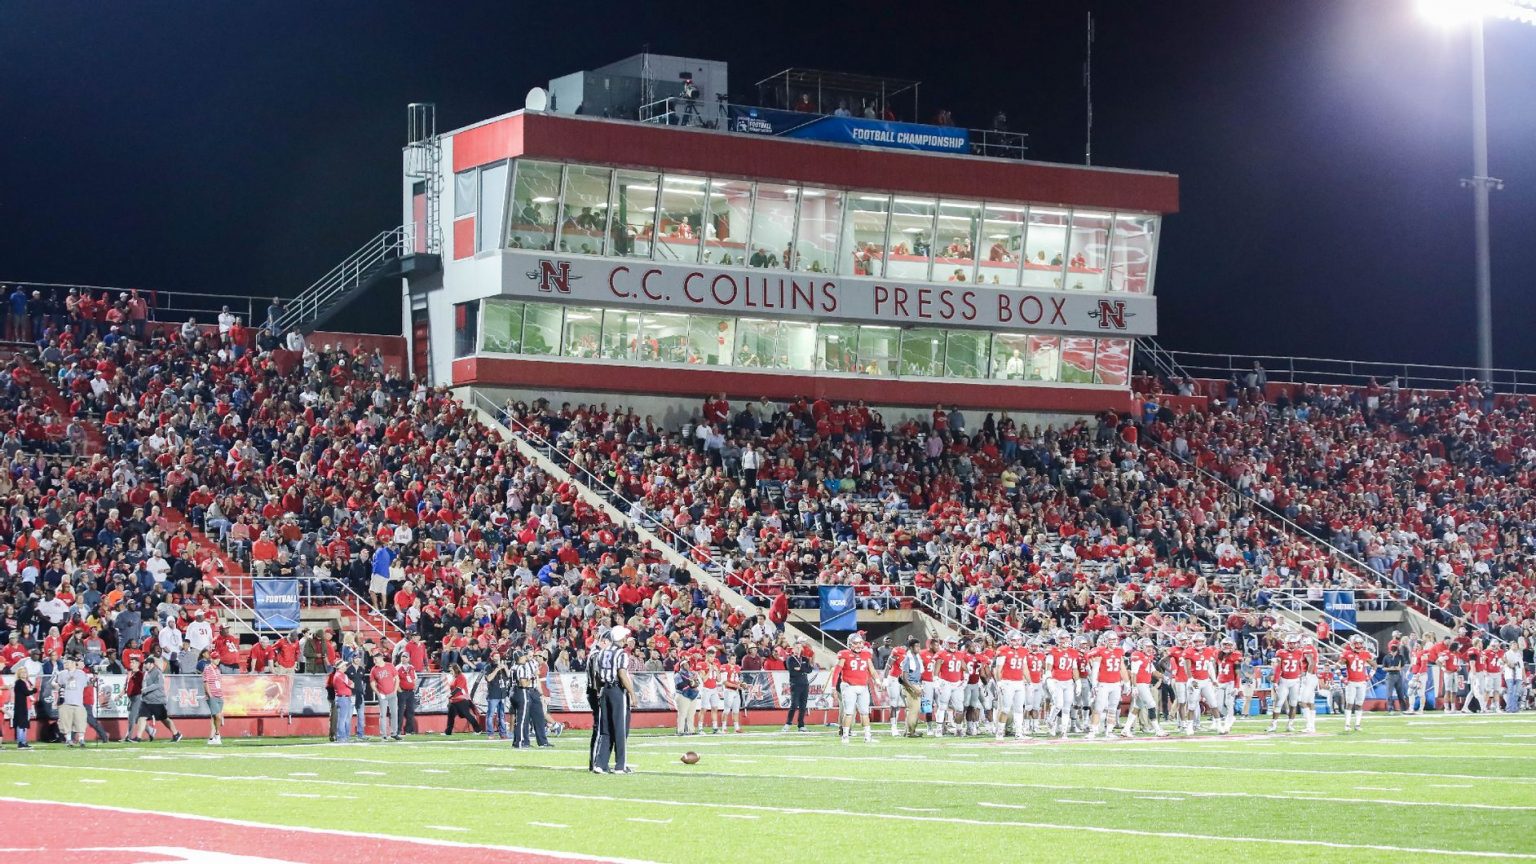 Nicholls Athletics Announces New Football Gameday Policies The Times